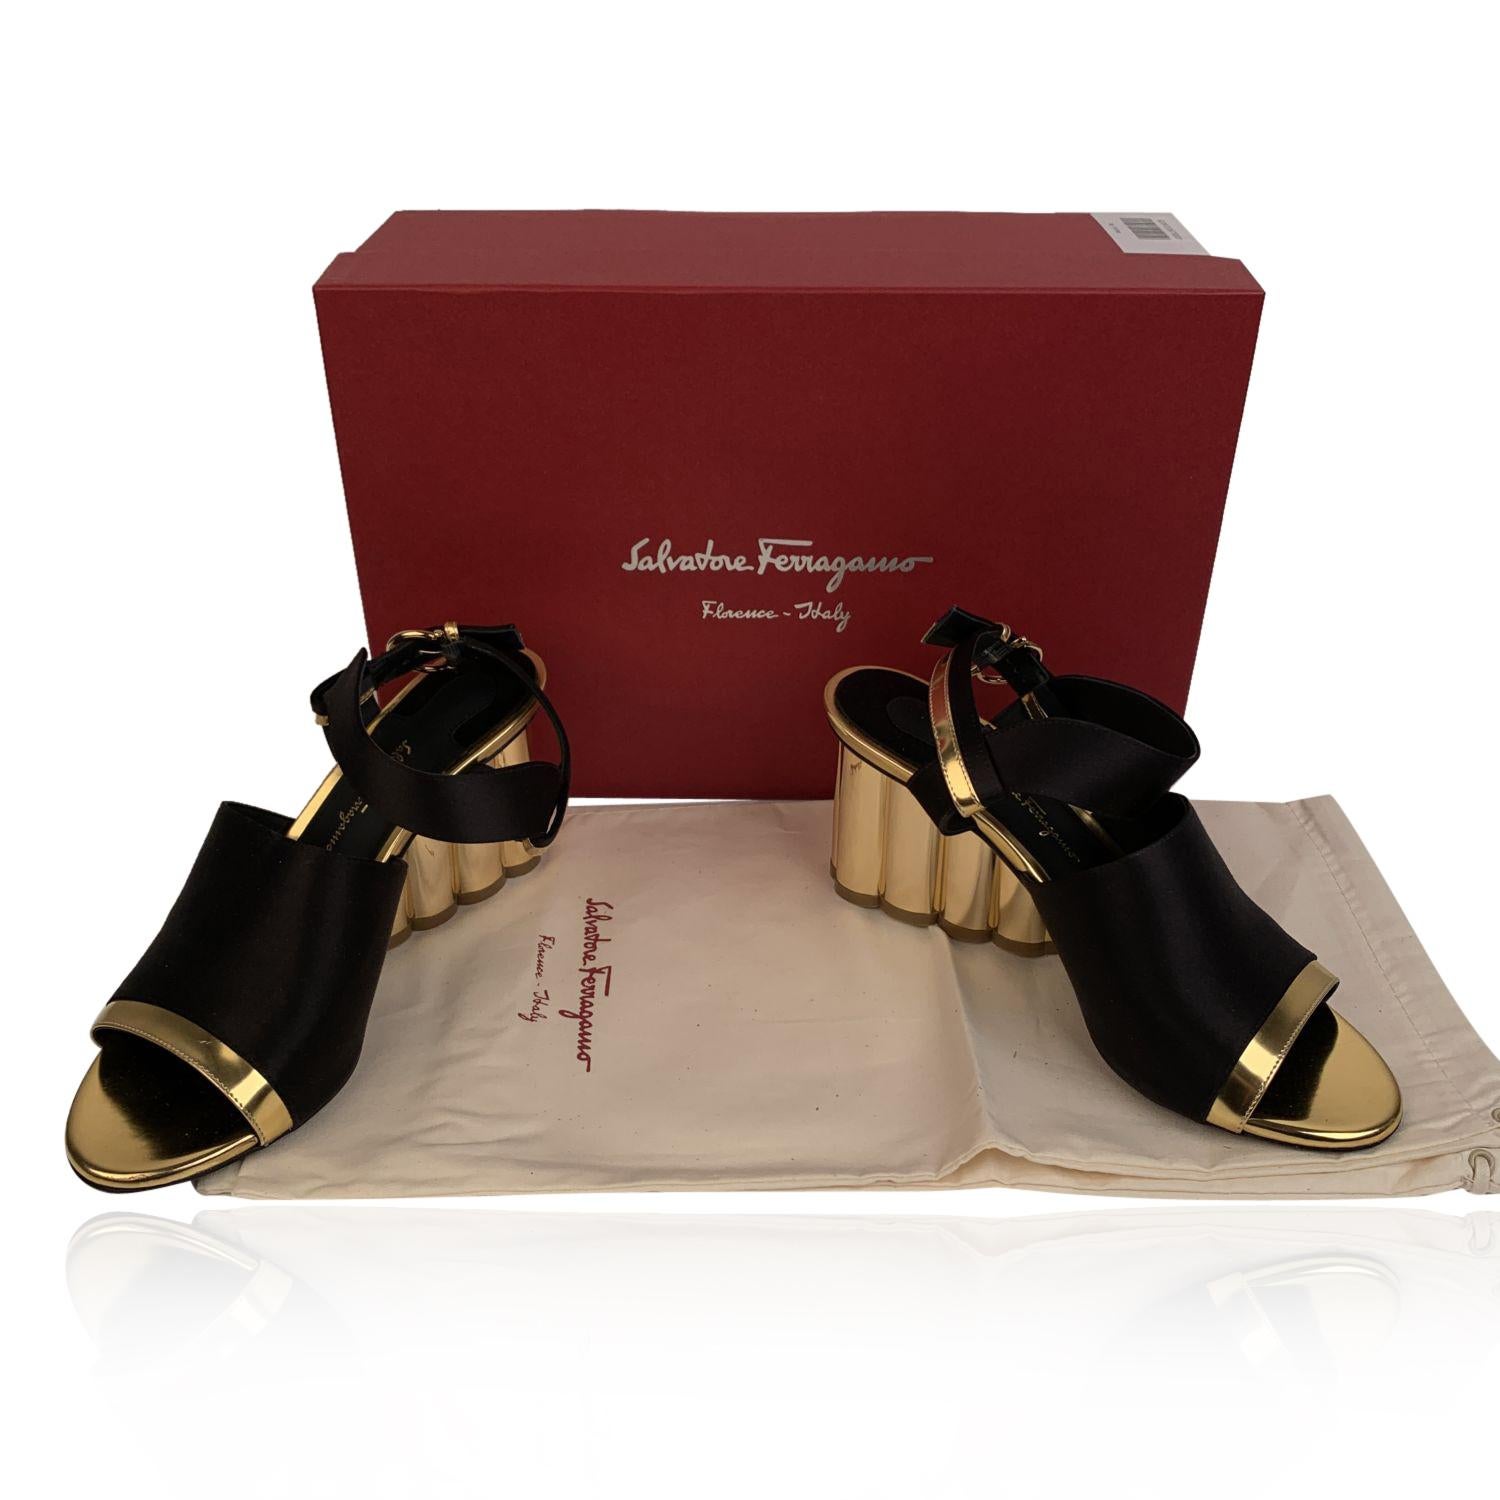 Elegant Salvatore Ferragamo 'Greci 70' heeled sandals. Crafted in black satin with shiny gold metal leather accents. They feature peep toe, slingback design and buckle closure on the ankle. Gold metal scalloped block heels. Heels Height: 2.75 inches